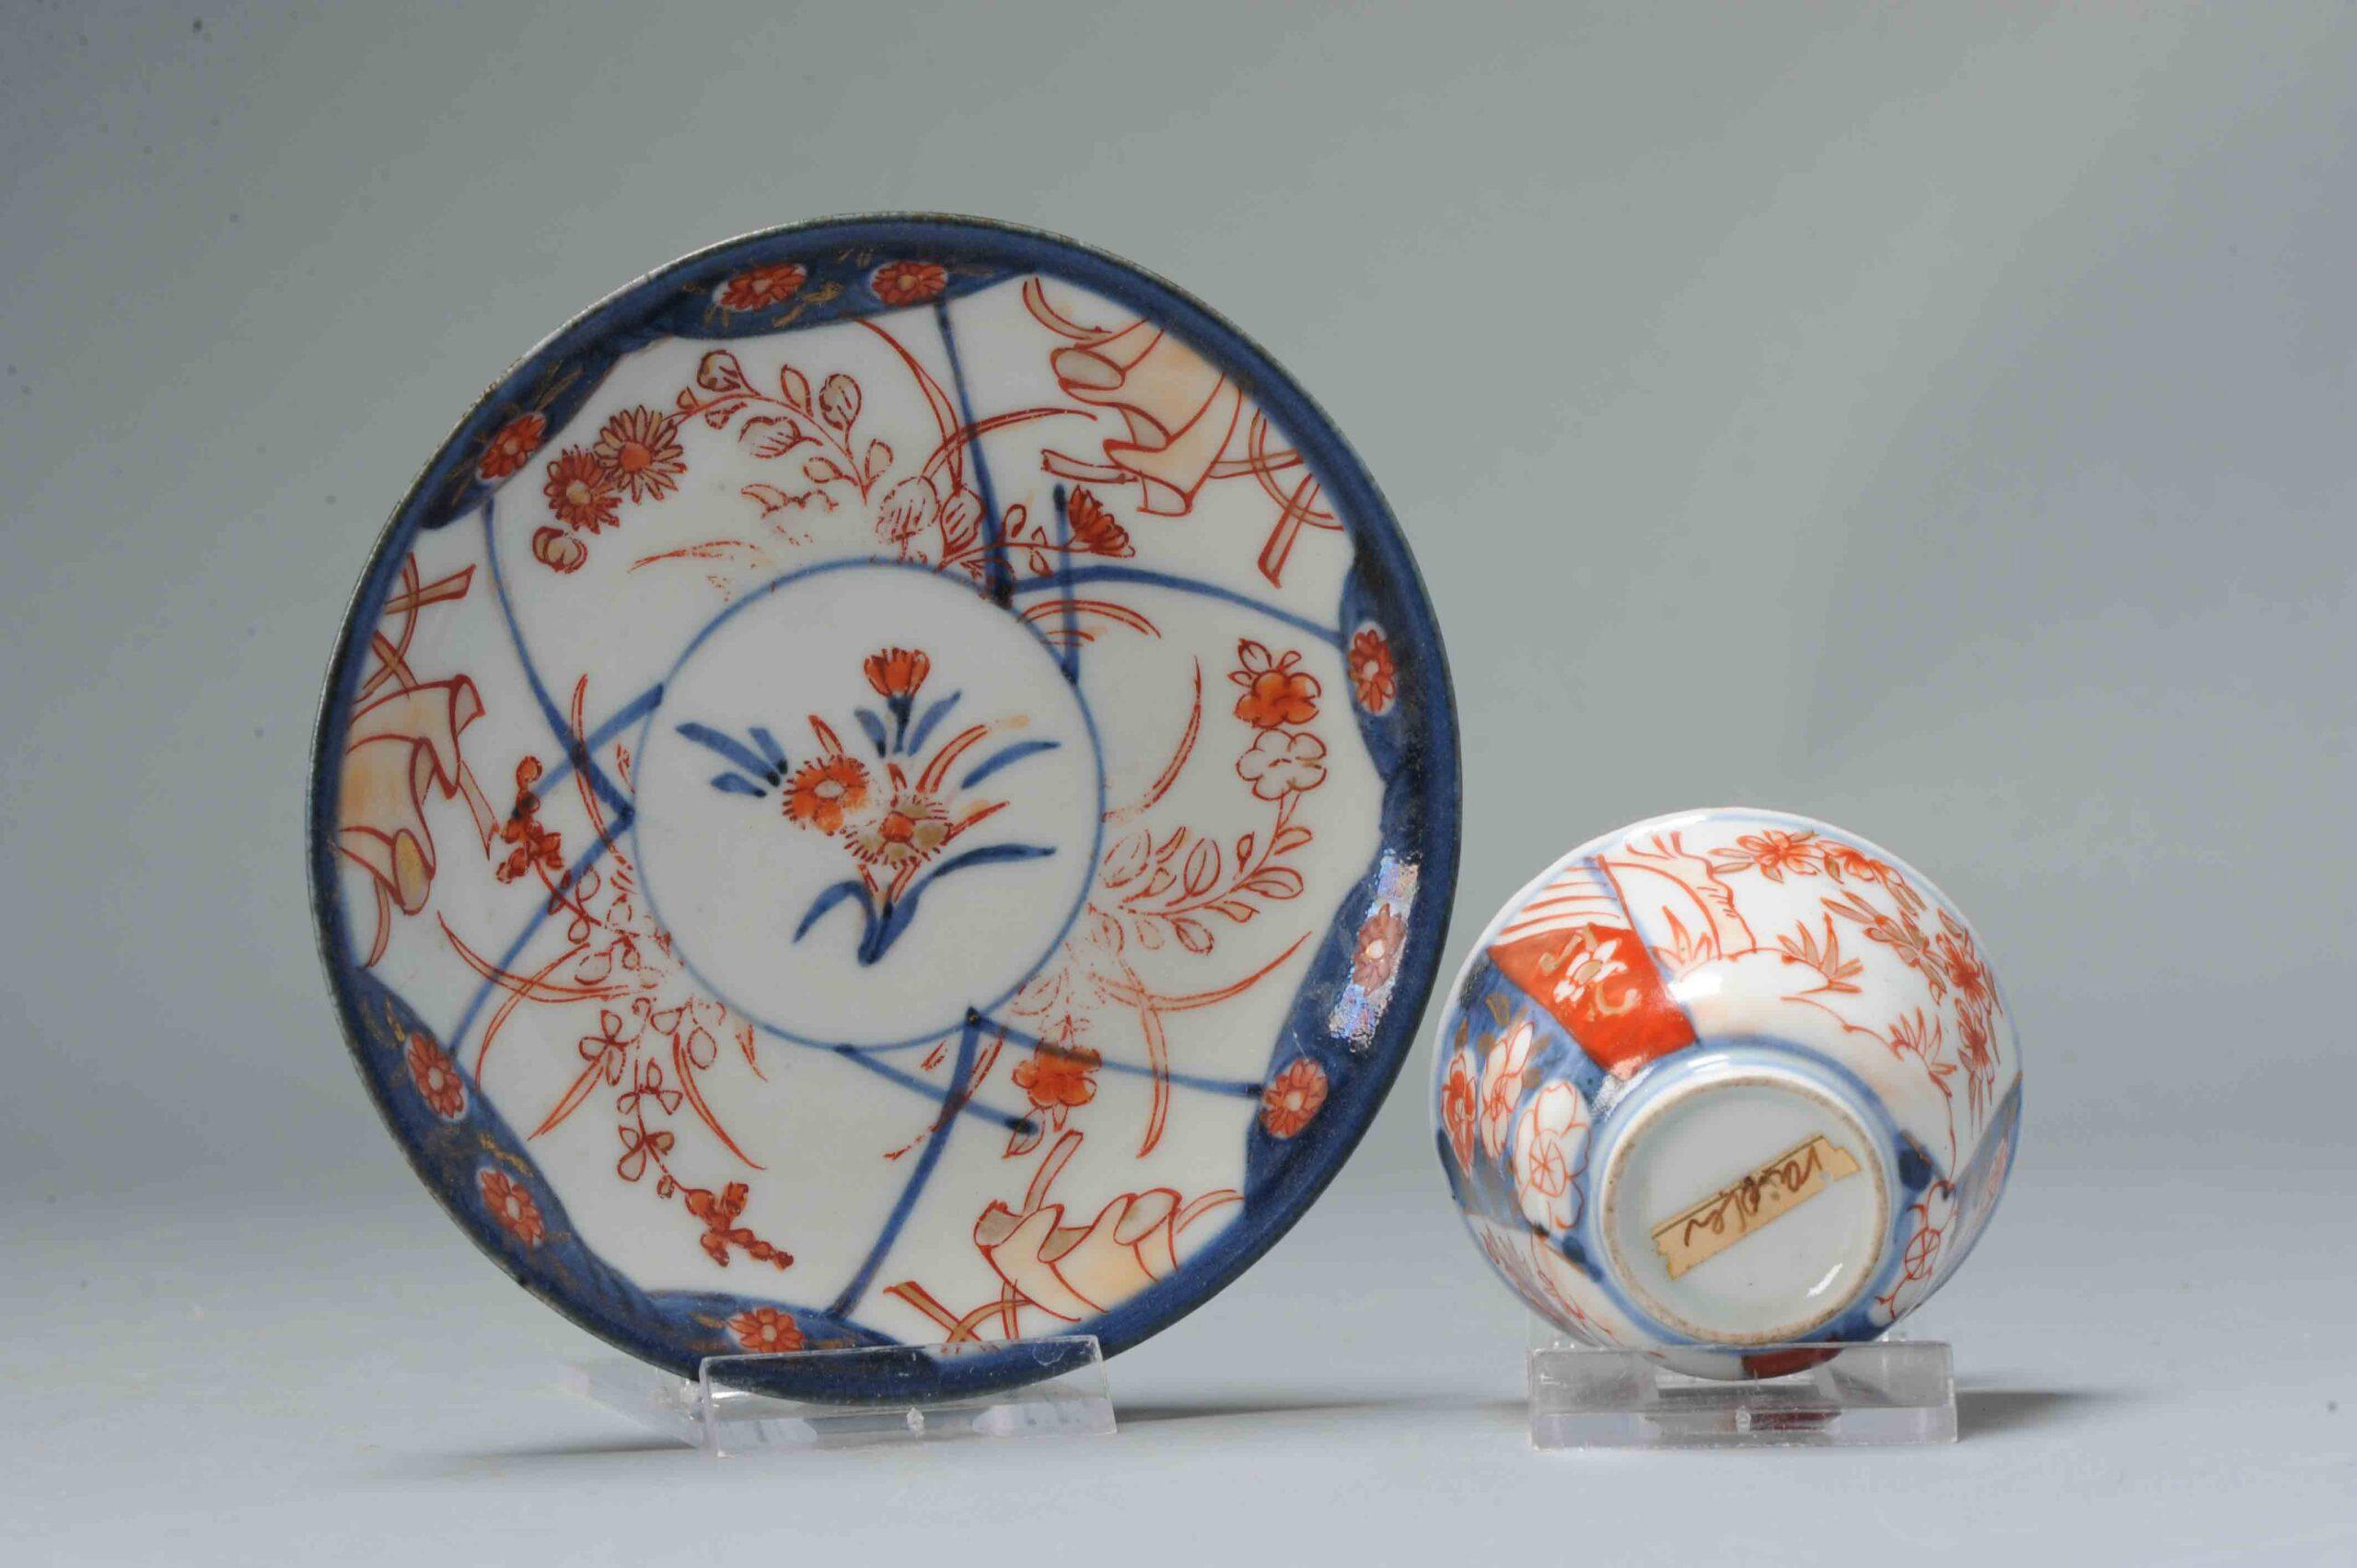 Porcelain decorated in underglaze cobalt blue and overglaze red. Tea Bowl
Edo , c. 1700

Additional information:
Material: Porcelain & Pottery
Type: Tea/Coffee Drinking: Bowls, Cups & Teapots
Category: Blue & White
Emperor: Kangxi (1661-1722)
Region